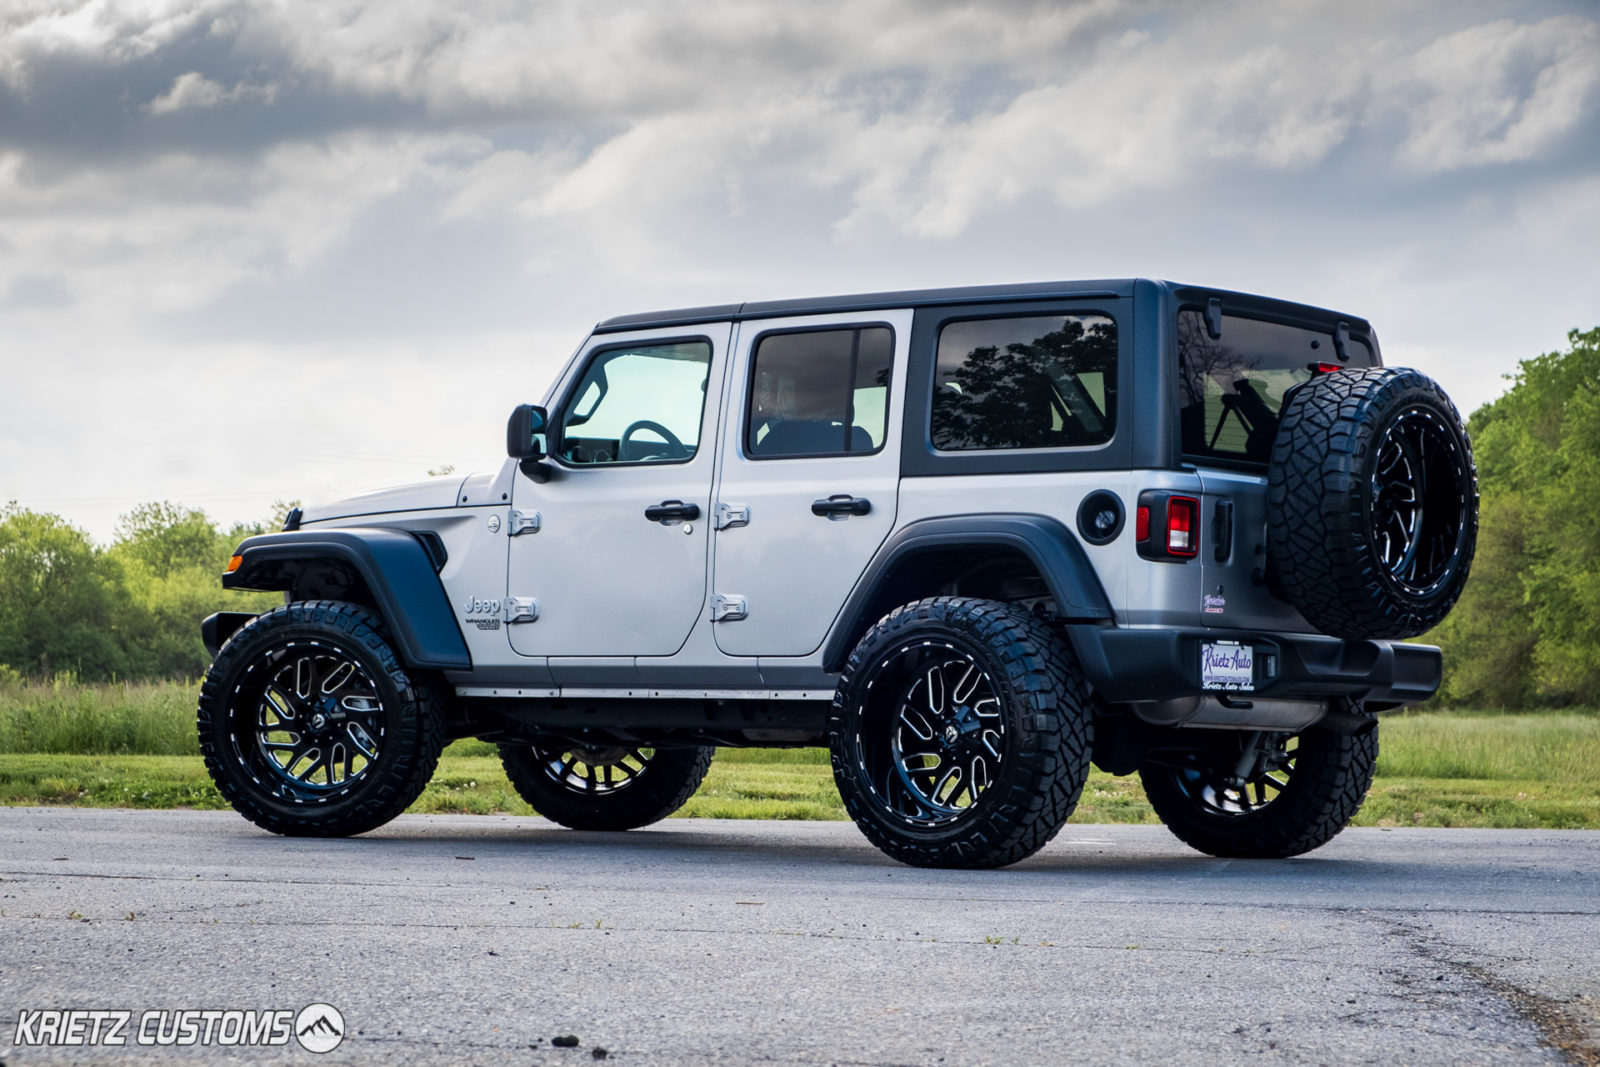 Lifted 2019 Jeep Wrangler with 22×12 Fuel Triton Wheels and 2.5 Inch